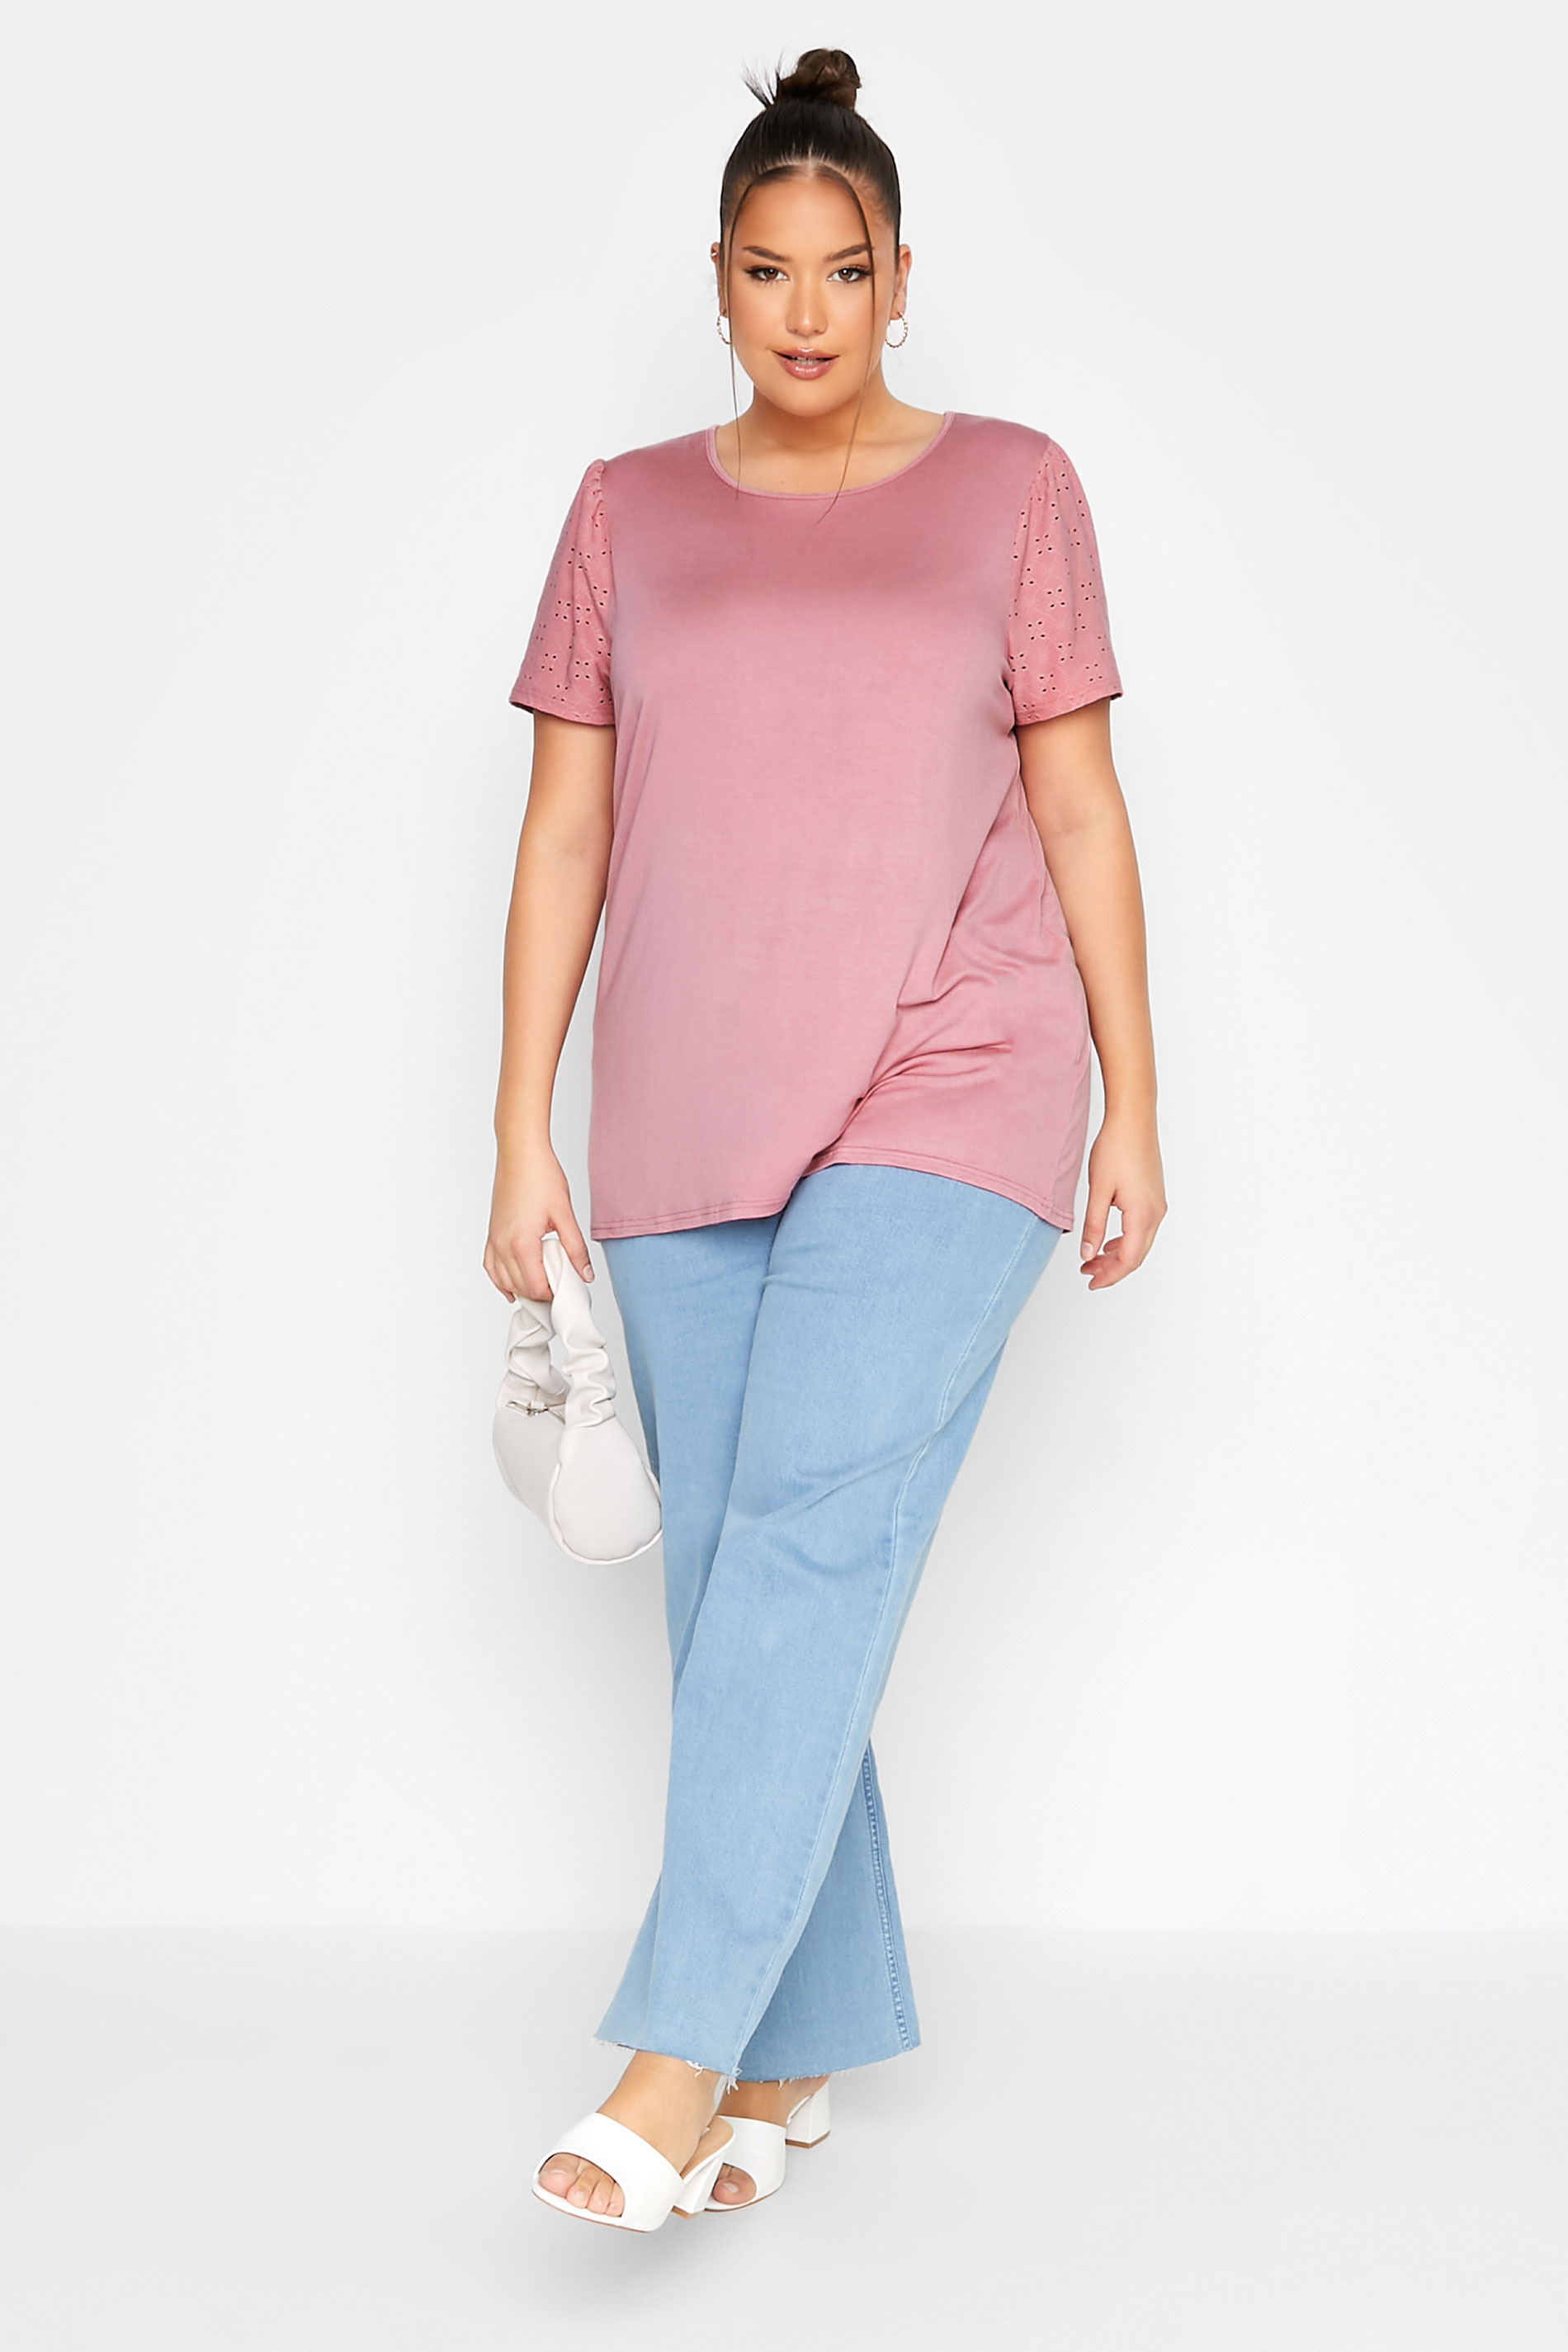 Grande taille  Tops Grande taille  T-Shirts | LIMITED COLLECTION - T-Shirt Rose Manches Broderie Anglaise - CG87928